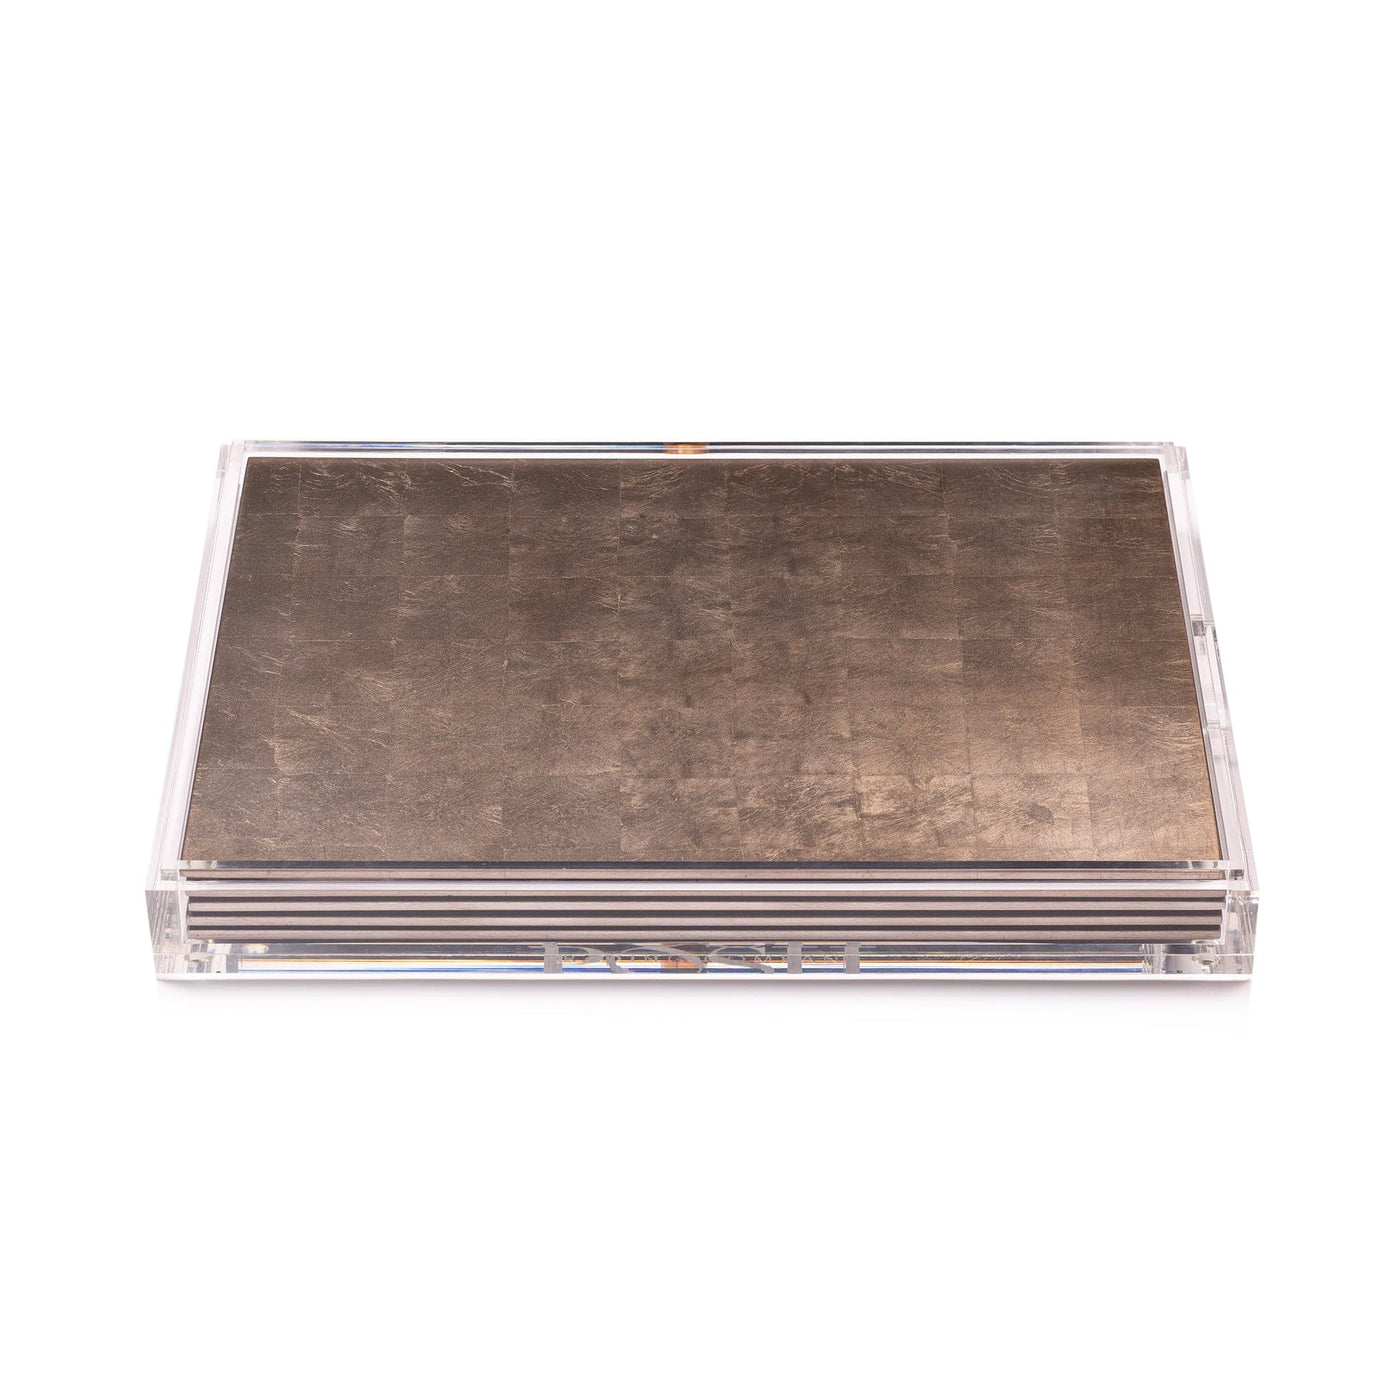 Servebox Clear Silver Leaf Chic Matte Taupe - Posh Trading Company  - Interior furnishings london